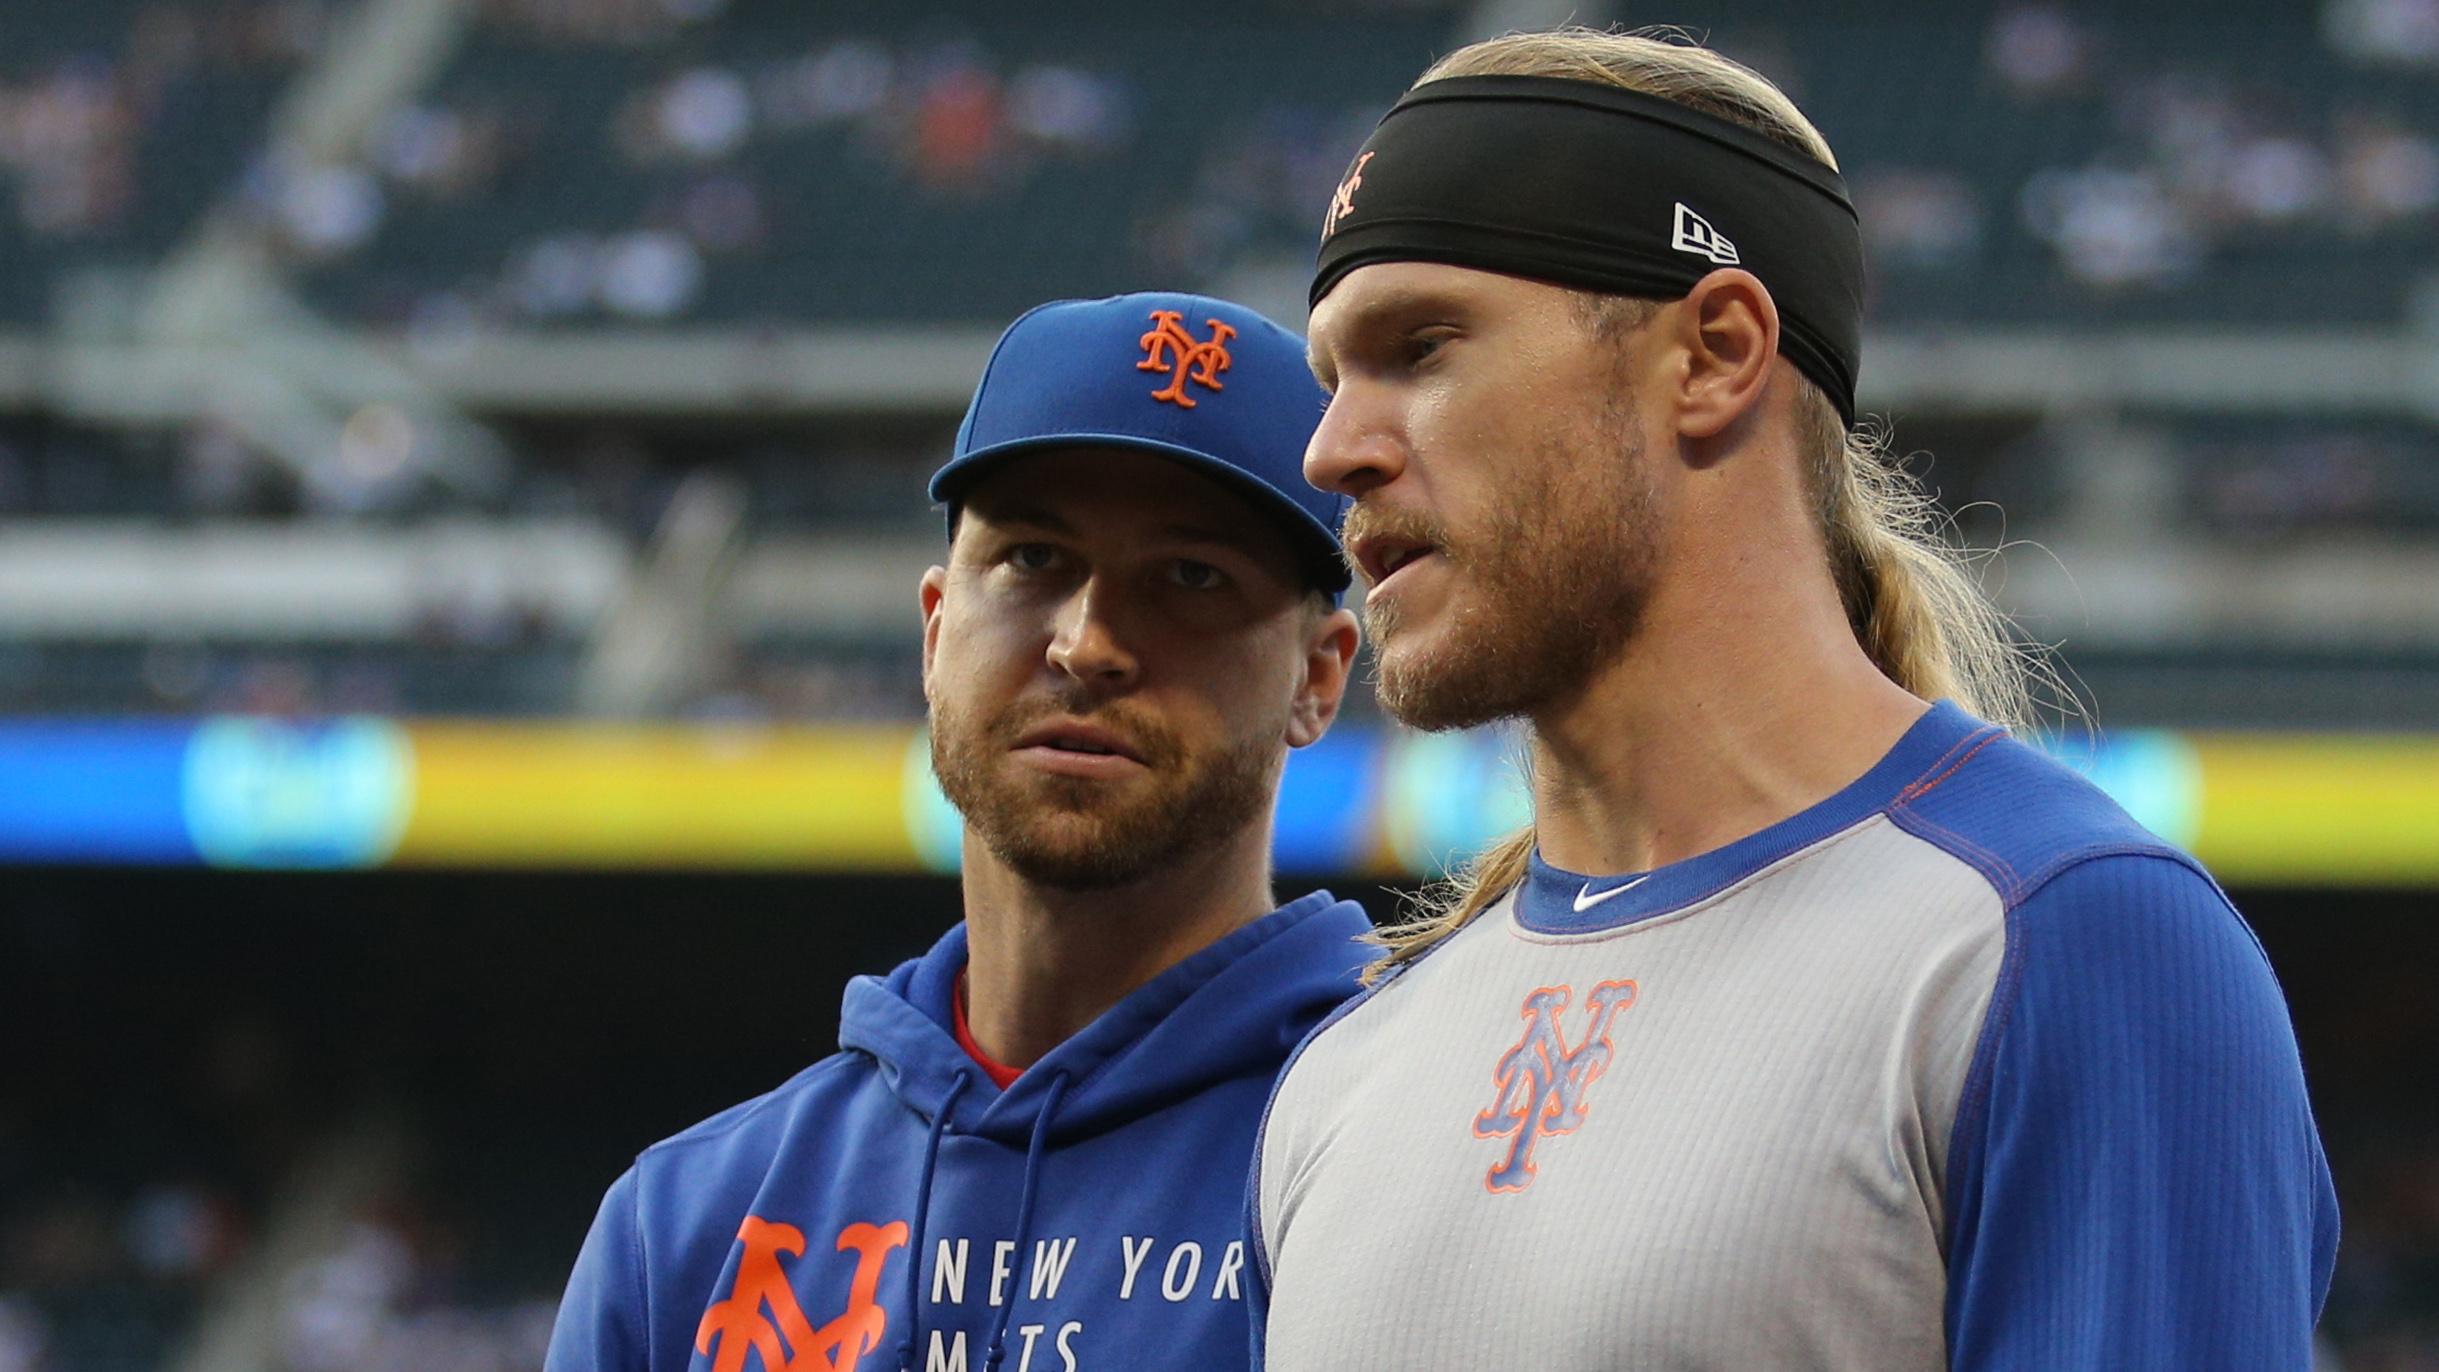 New York Mets injured starting pitchers Jacob deGrom (left) and Noah Syndergaard walk in from the bullpen before a game against the Atlanta Braves at Citi Field. / Brad Penner-USA TODAY Sports